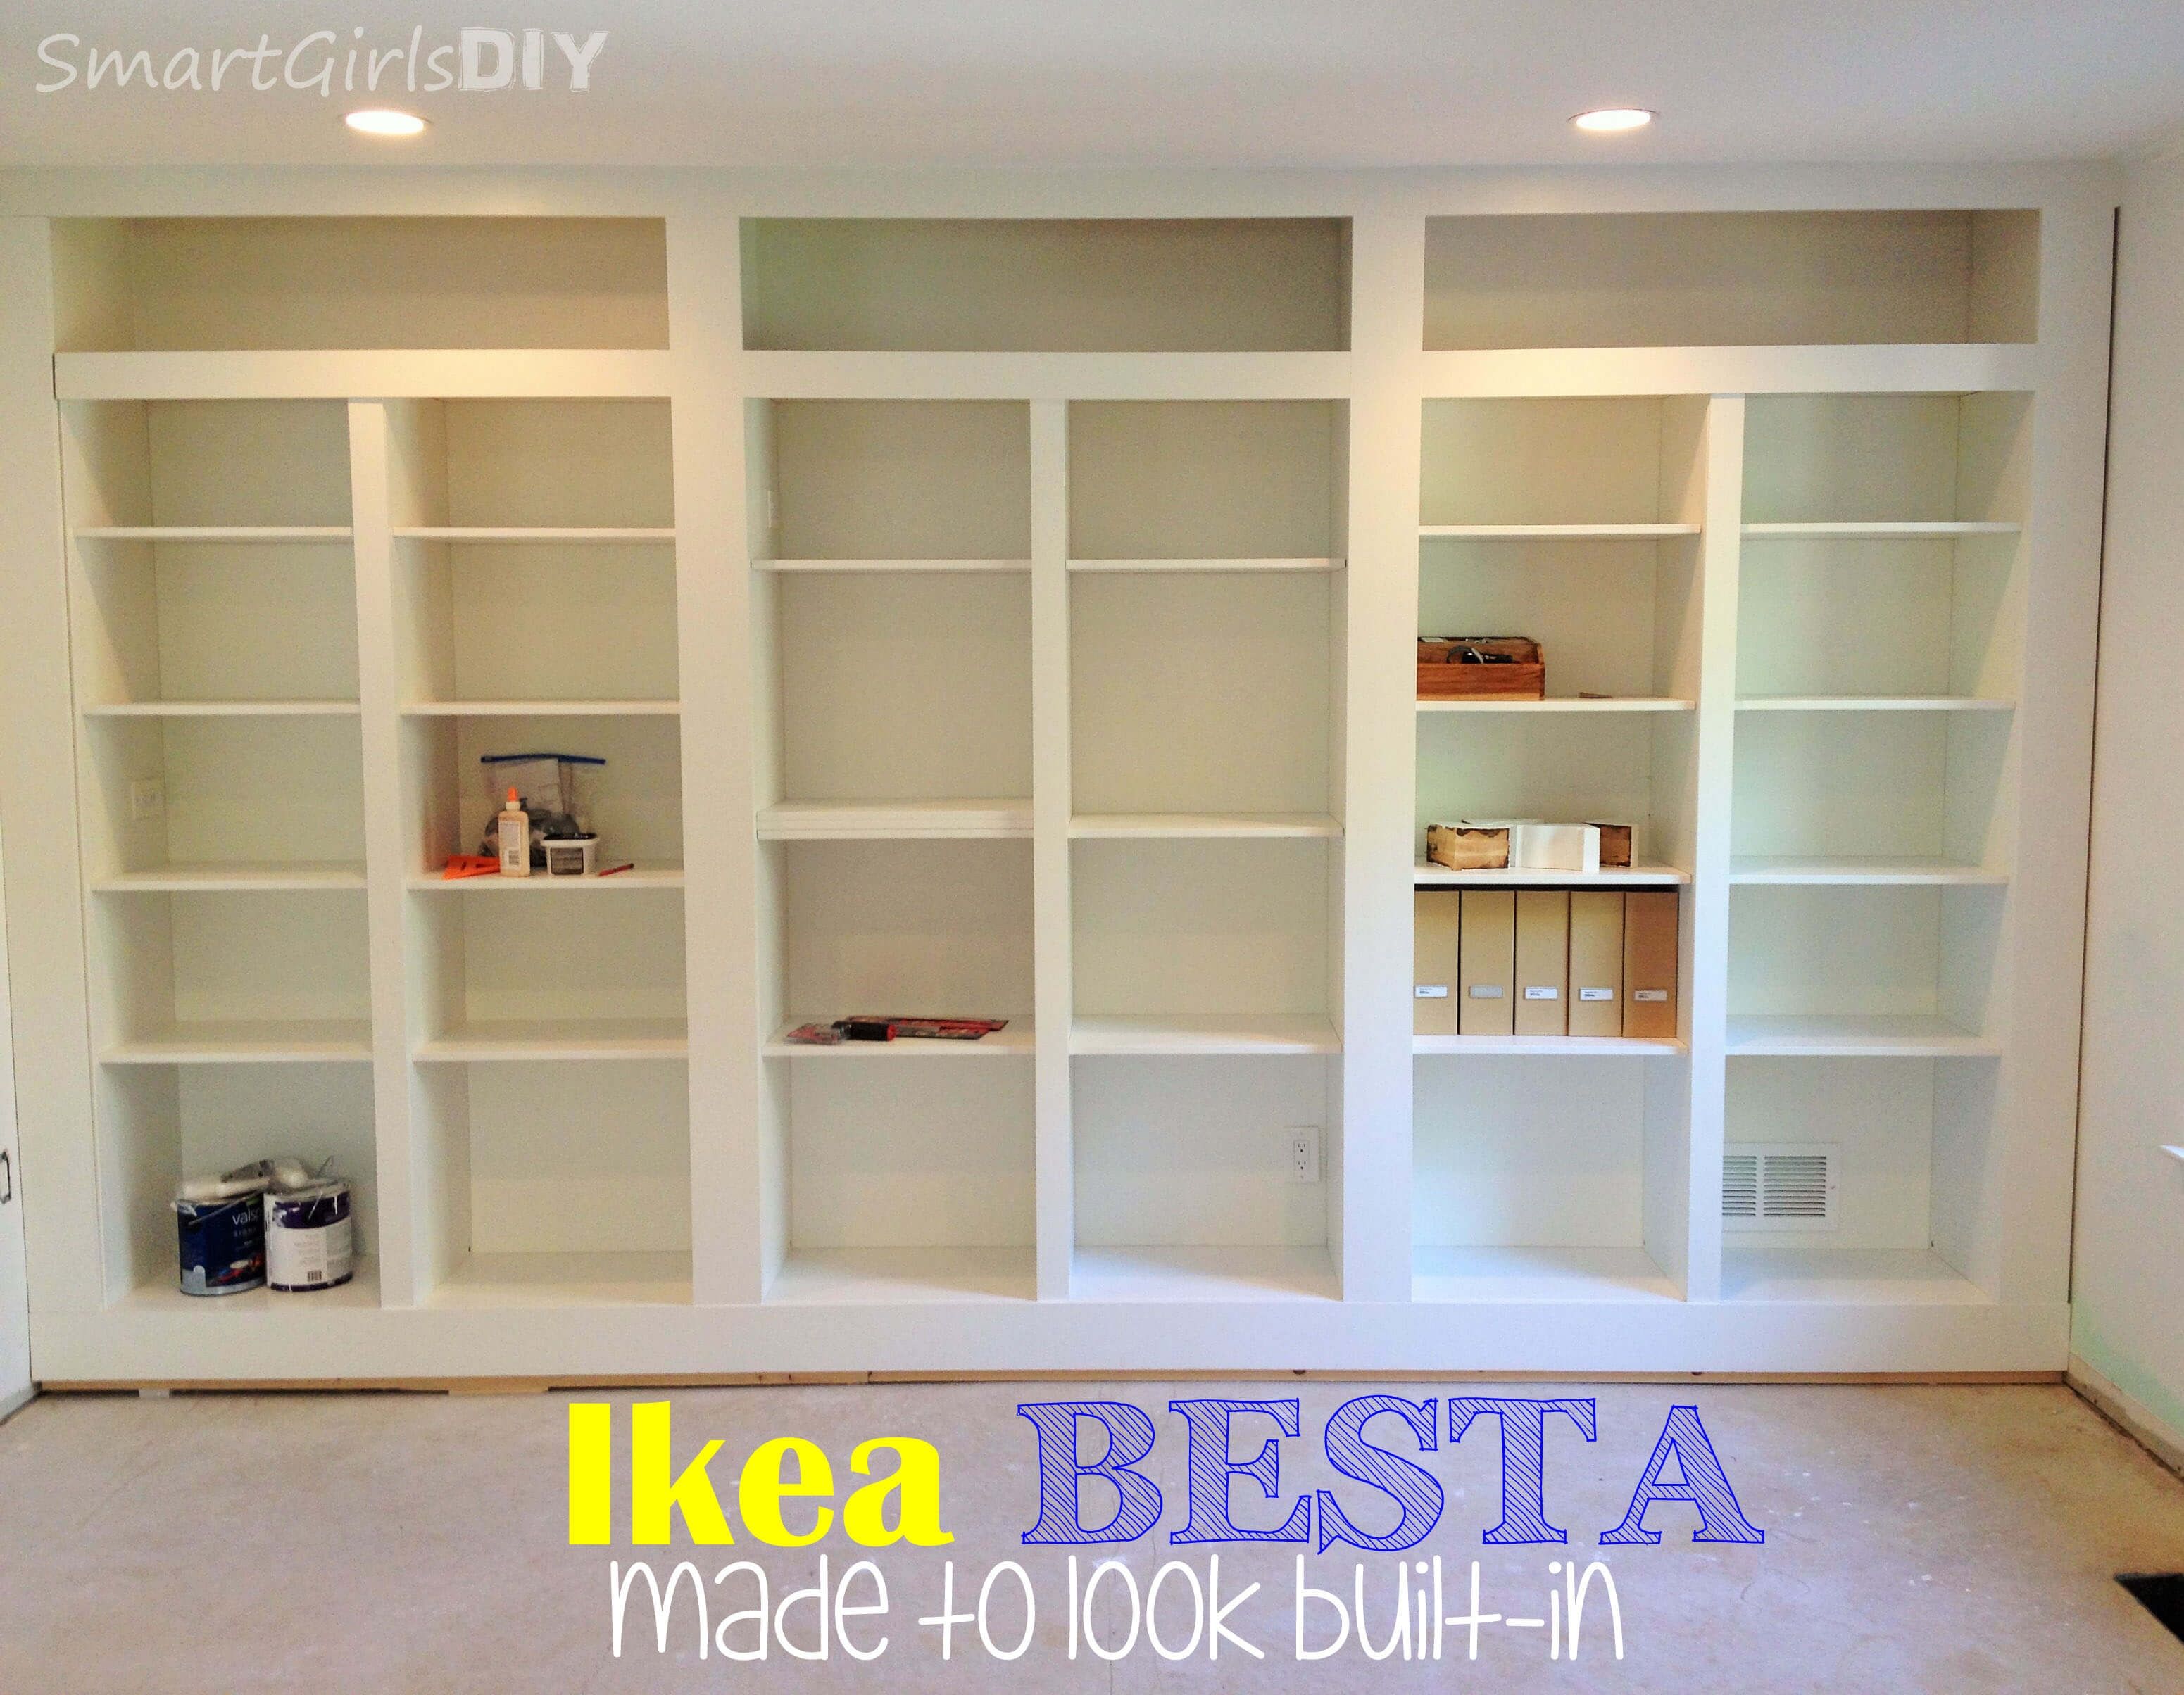 Diy Built In Bookshelves Using Ikea Besta Family Room 8 Within Made Bookcase (View 13 of 15)